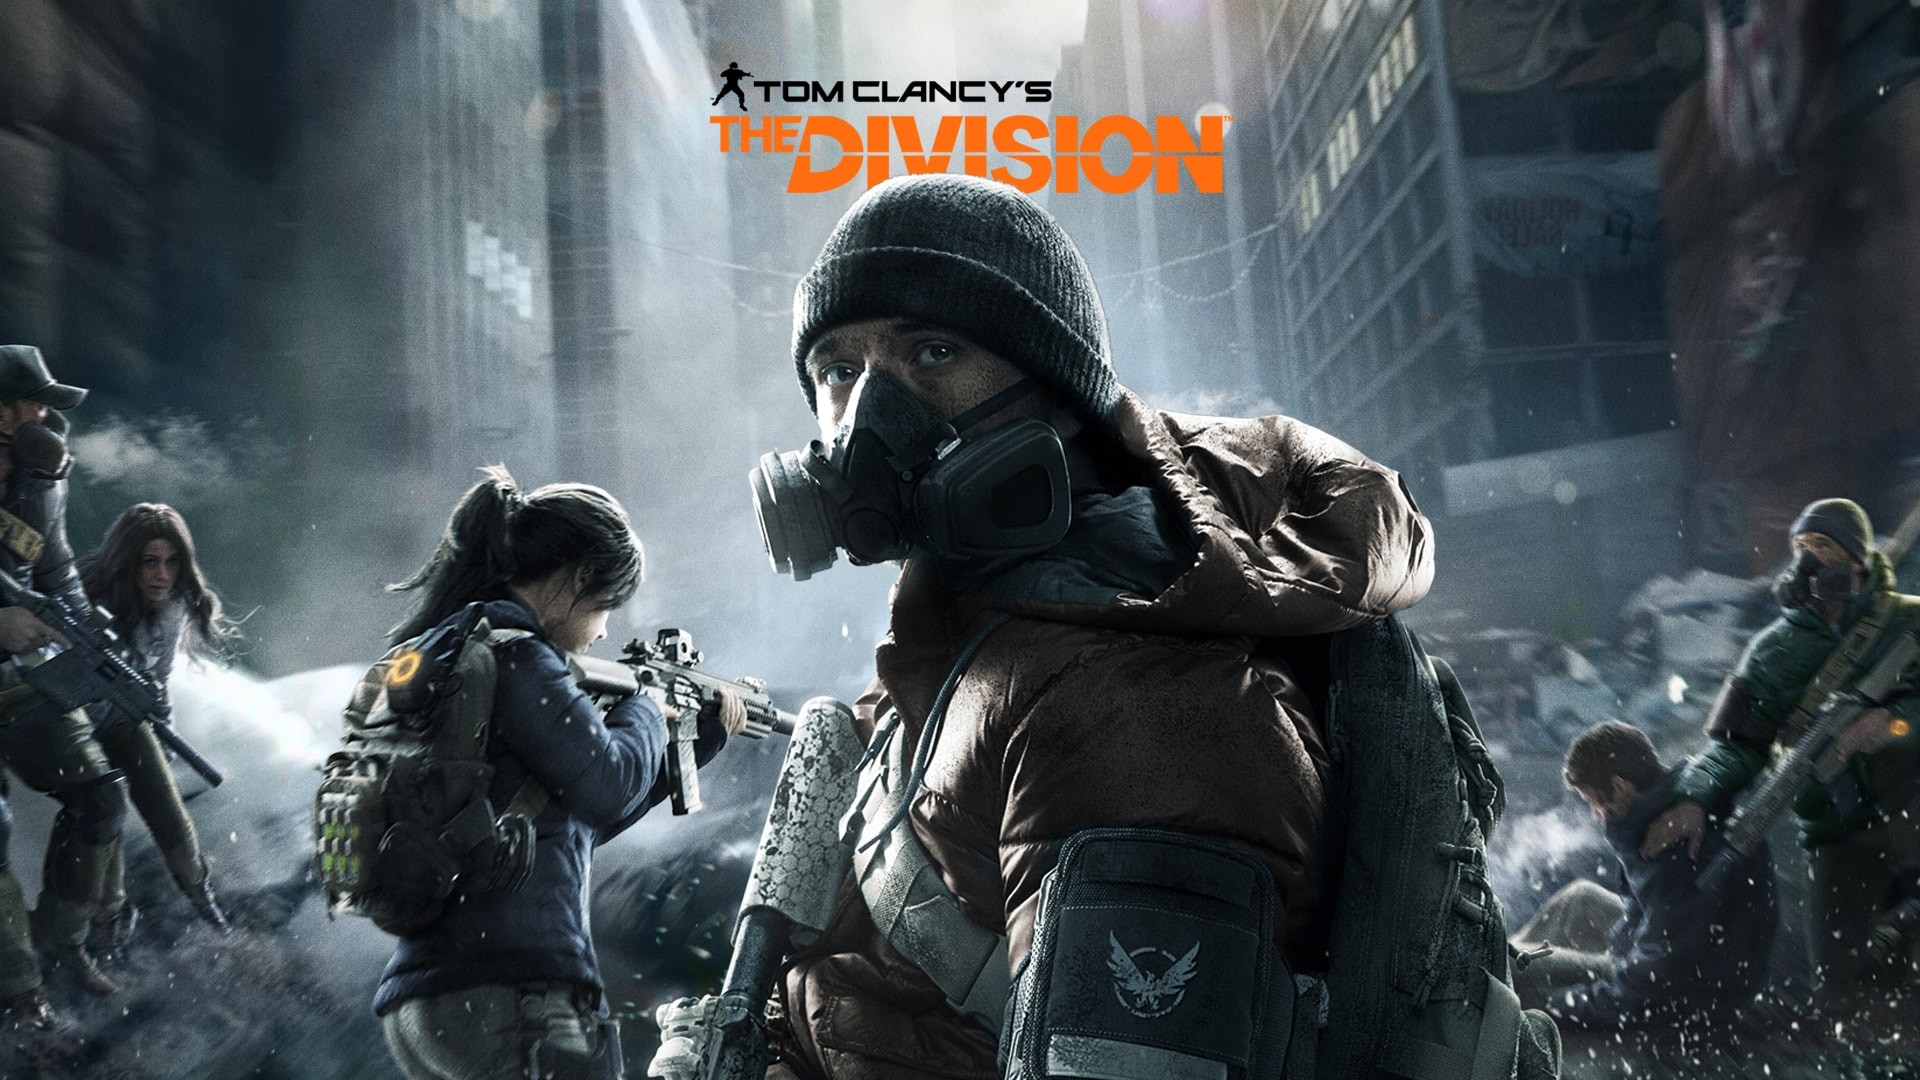 Tom Clancys The Division Wallpapers hd